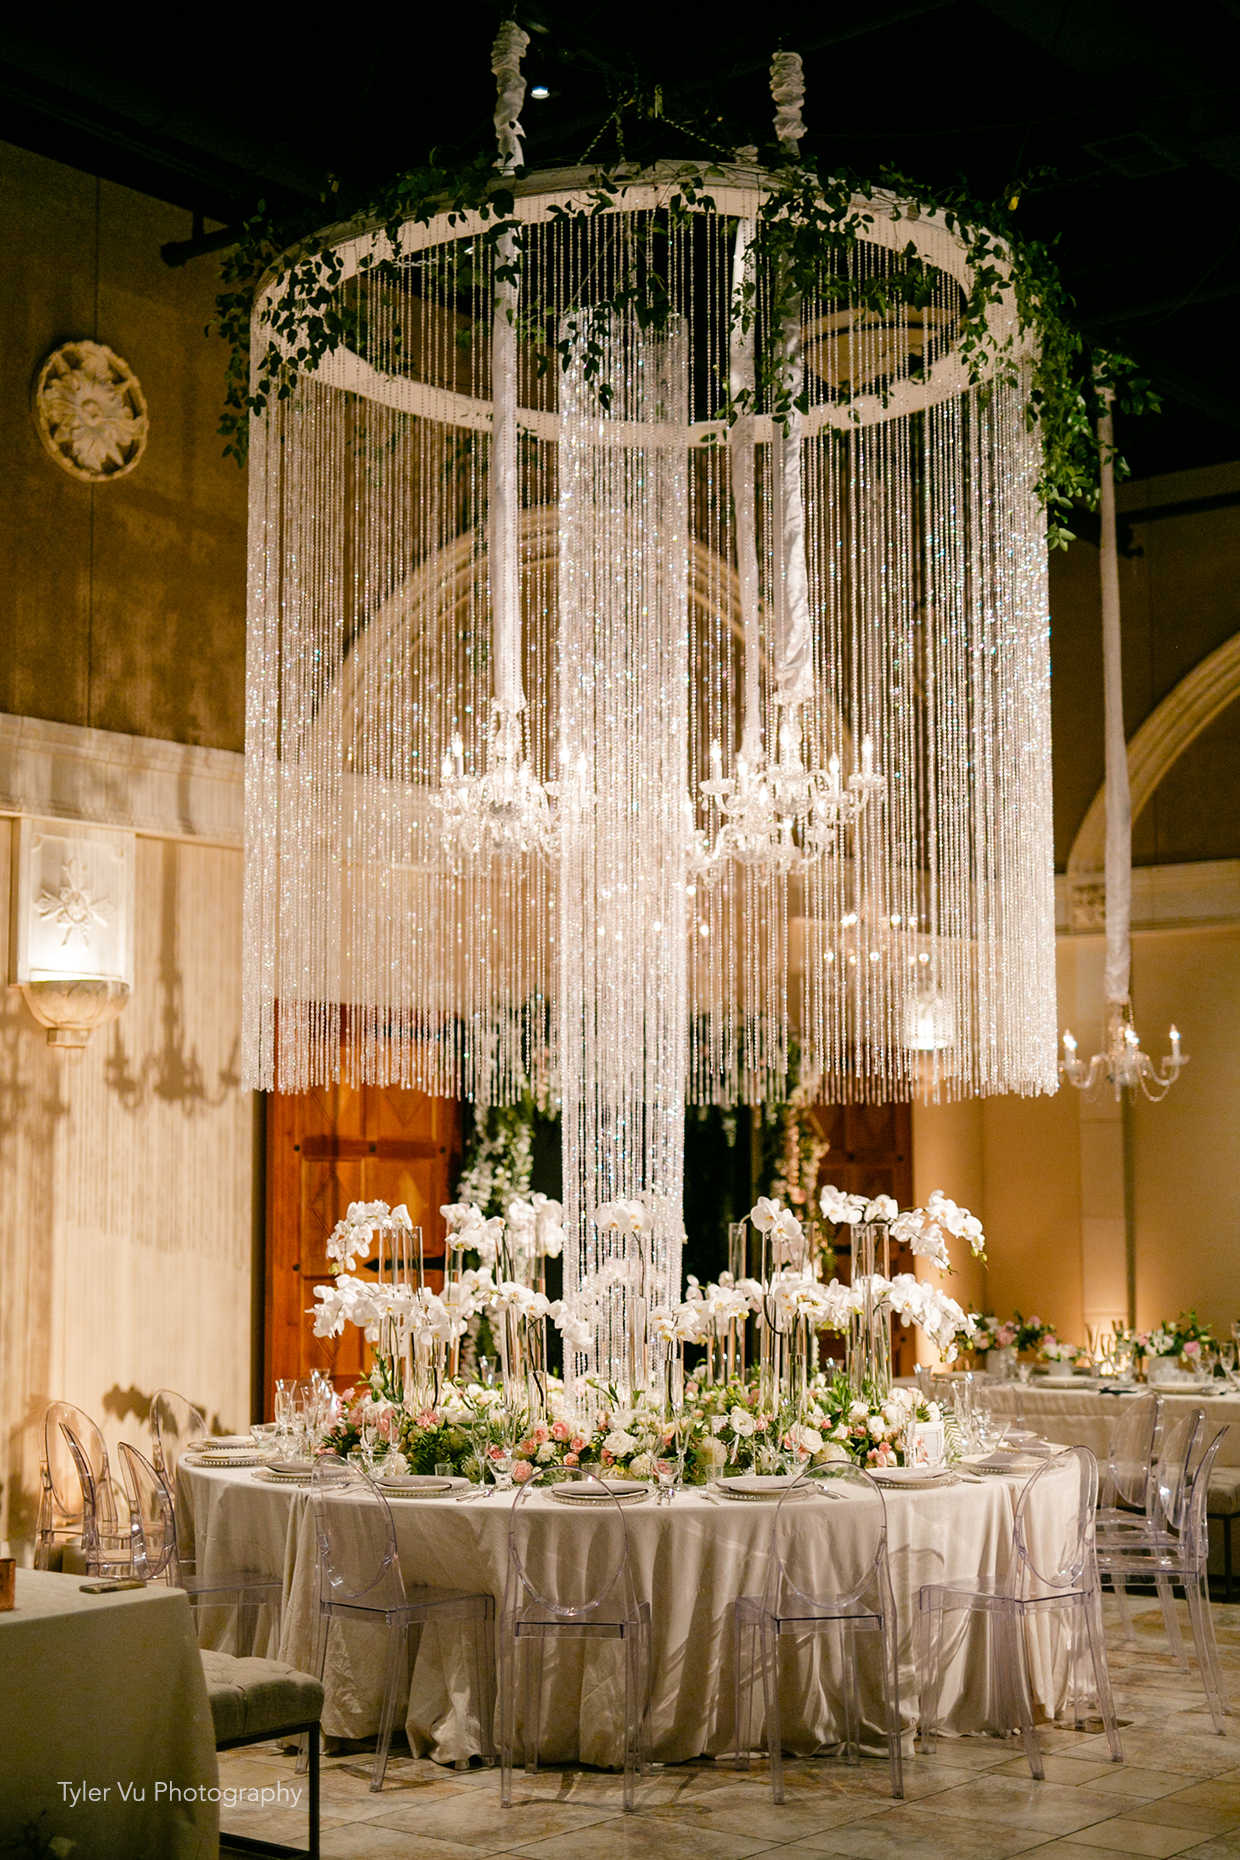 Stunning wedding reception table with overhead chandelier and orchid centerpieces at Casa Real at Ruby Hill Winery (www.casarealevents.com).  Photo by: Tyler Vu Photography; Florals and Design: Nicole Ha Design; Lighting: Fantasy Sound Event Services; Chairs: Pleasanton Rentals